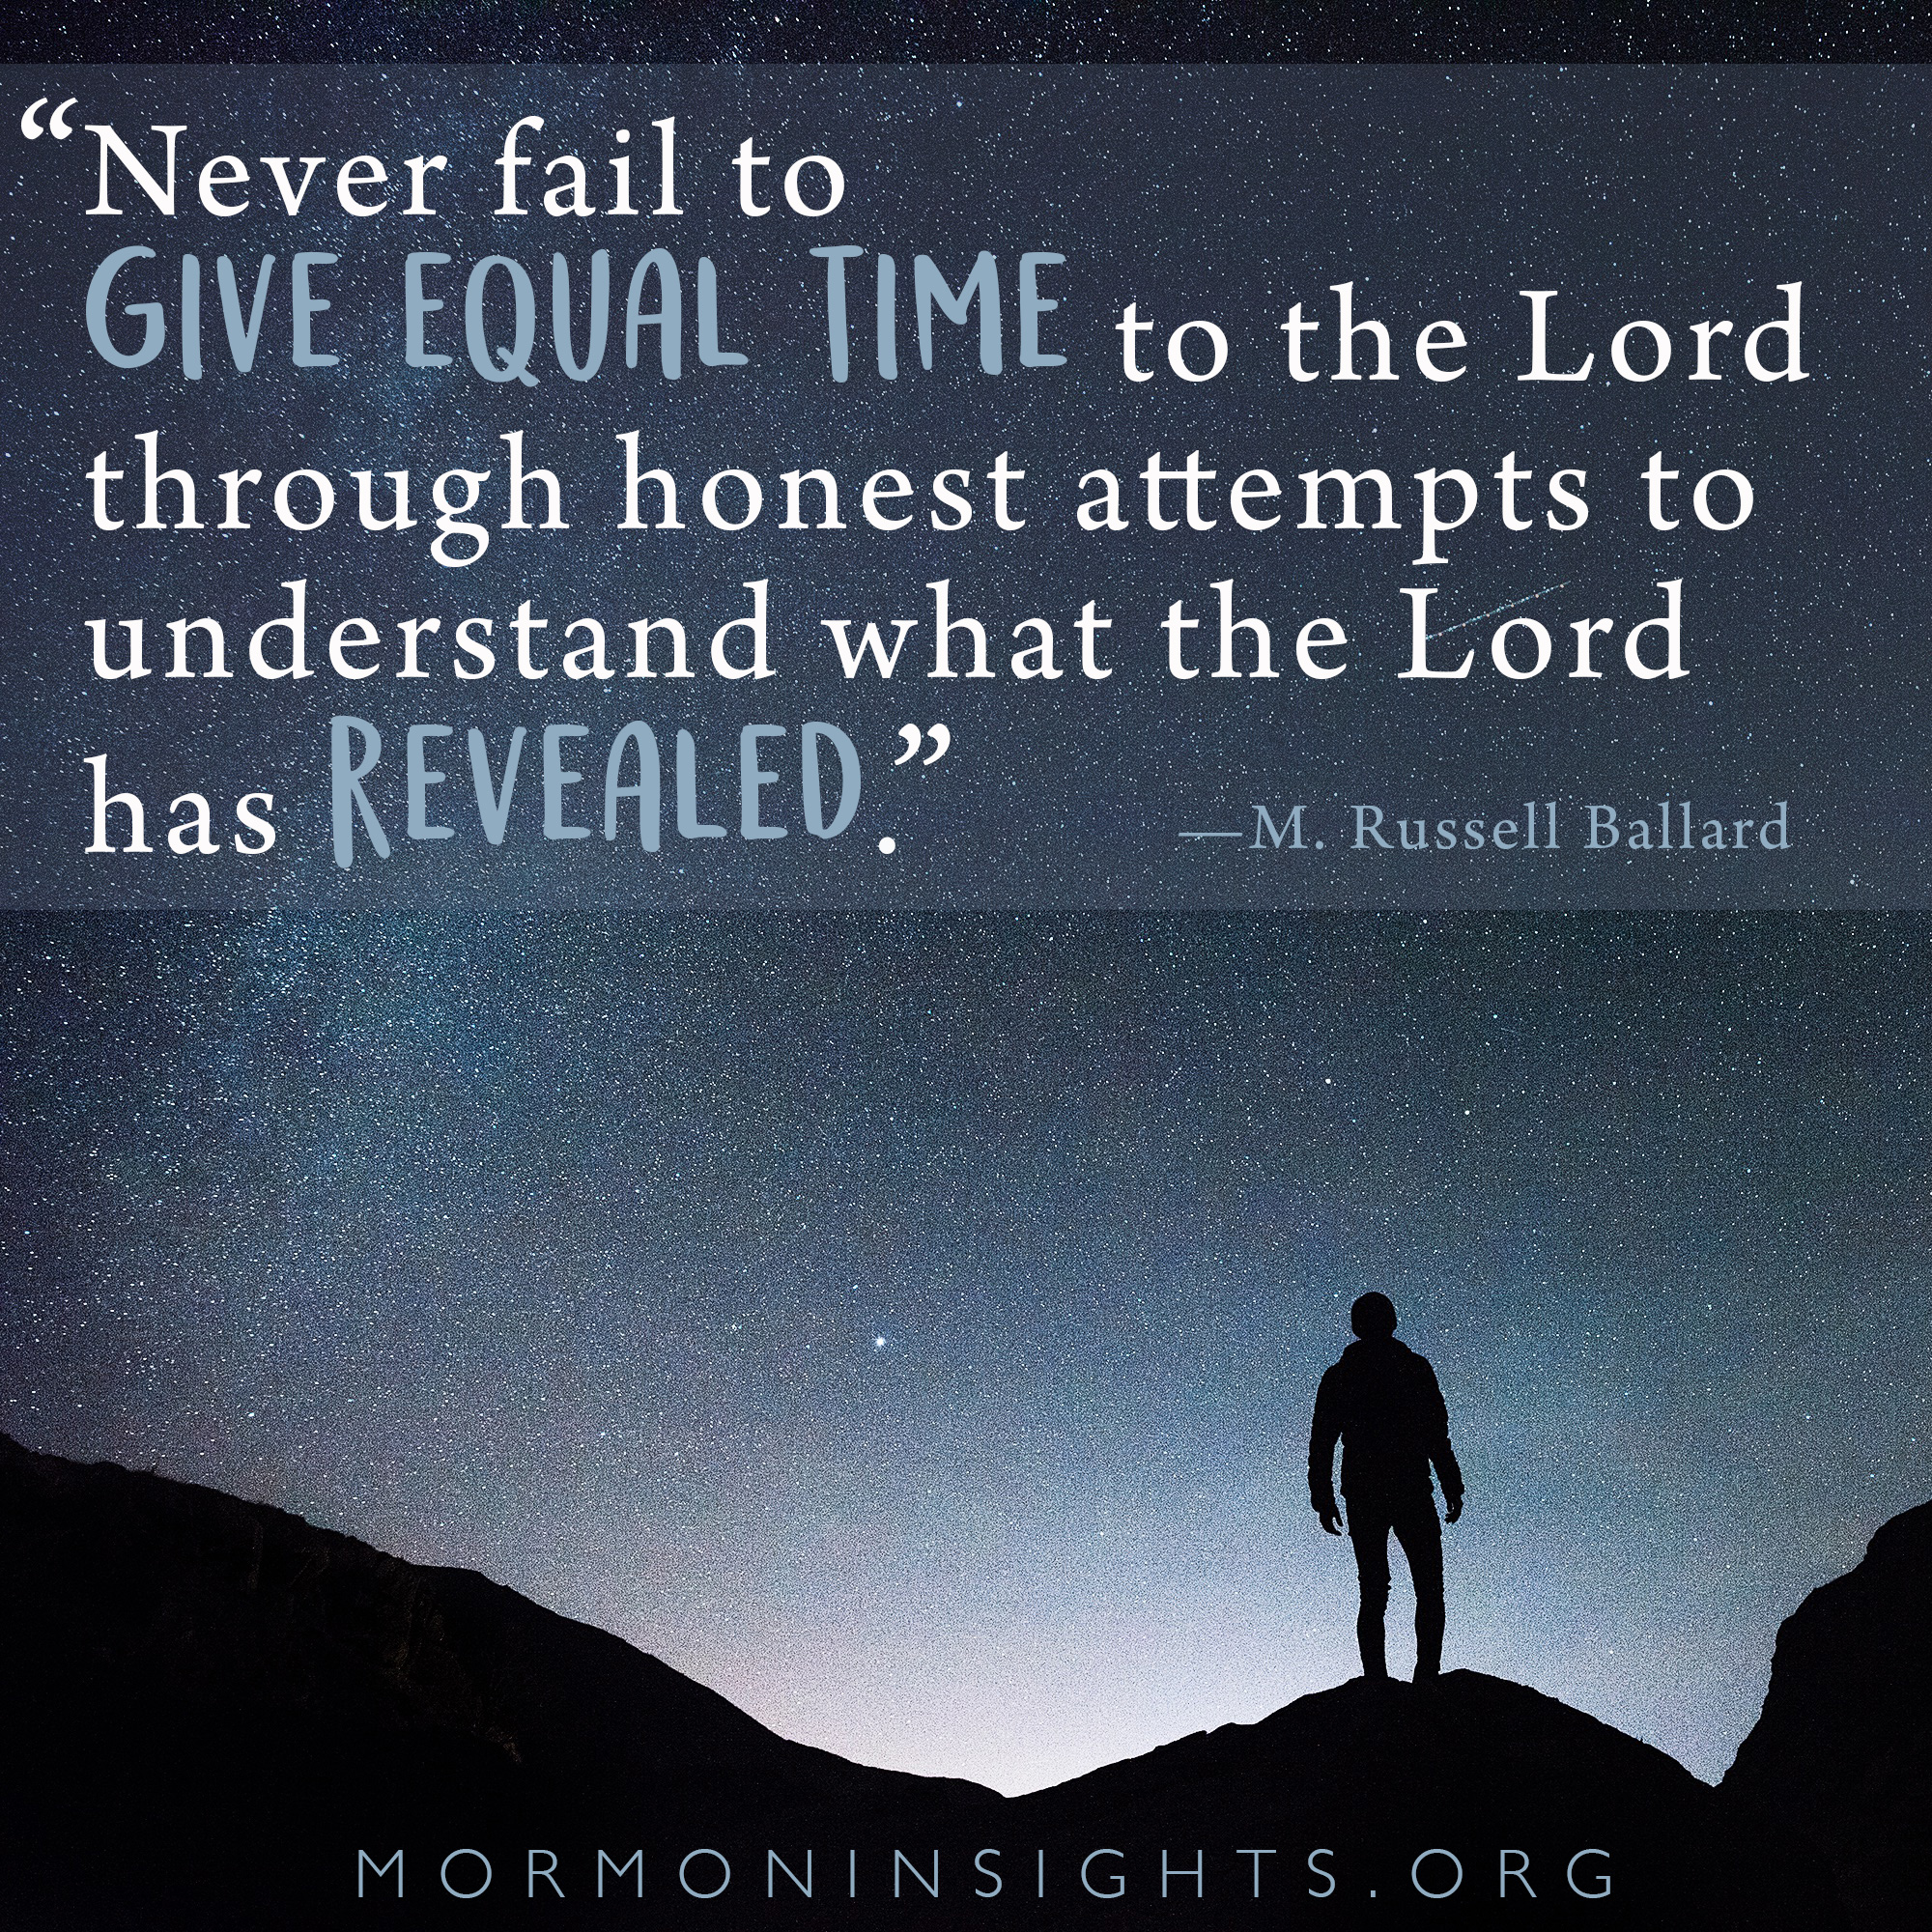 "Never fail to give equal time to the Lord through honest attempts to understand what the Lord has revealed." -M. Russell Ballard